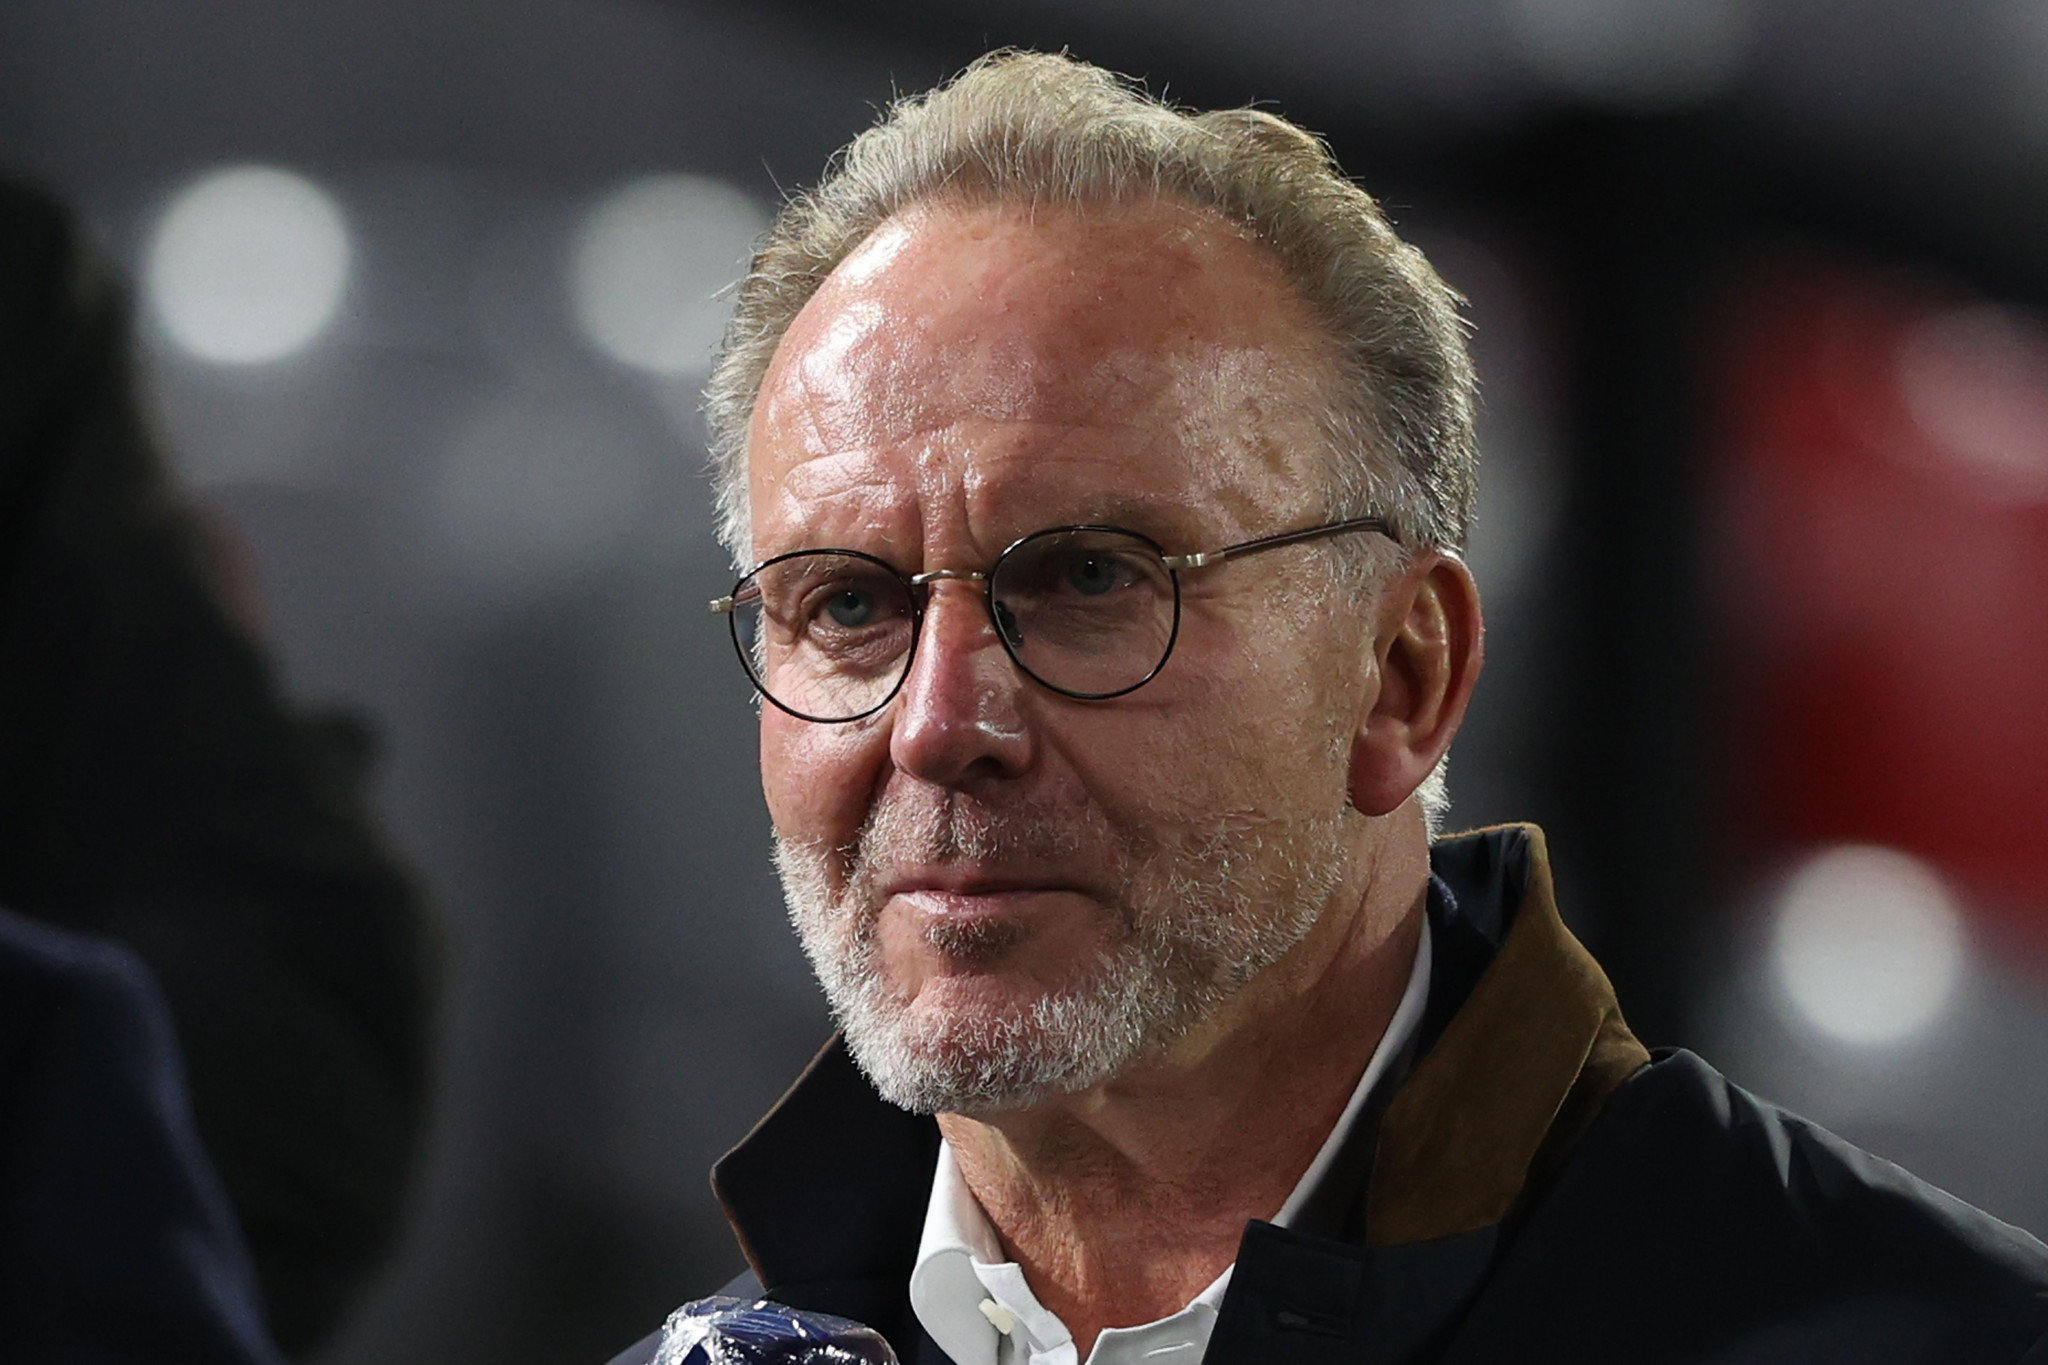 FC Bayern Munich chief executive Karl-Heinz Rummenigge claimed UEFA was considering the staging of Euro 2020 in one place ©Getty Images